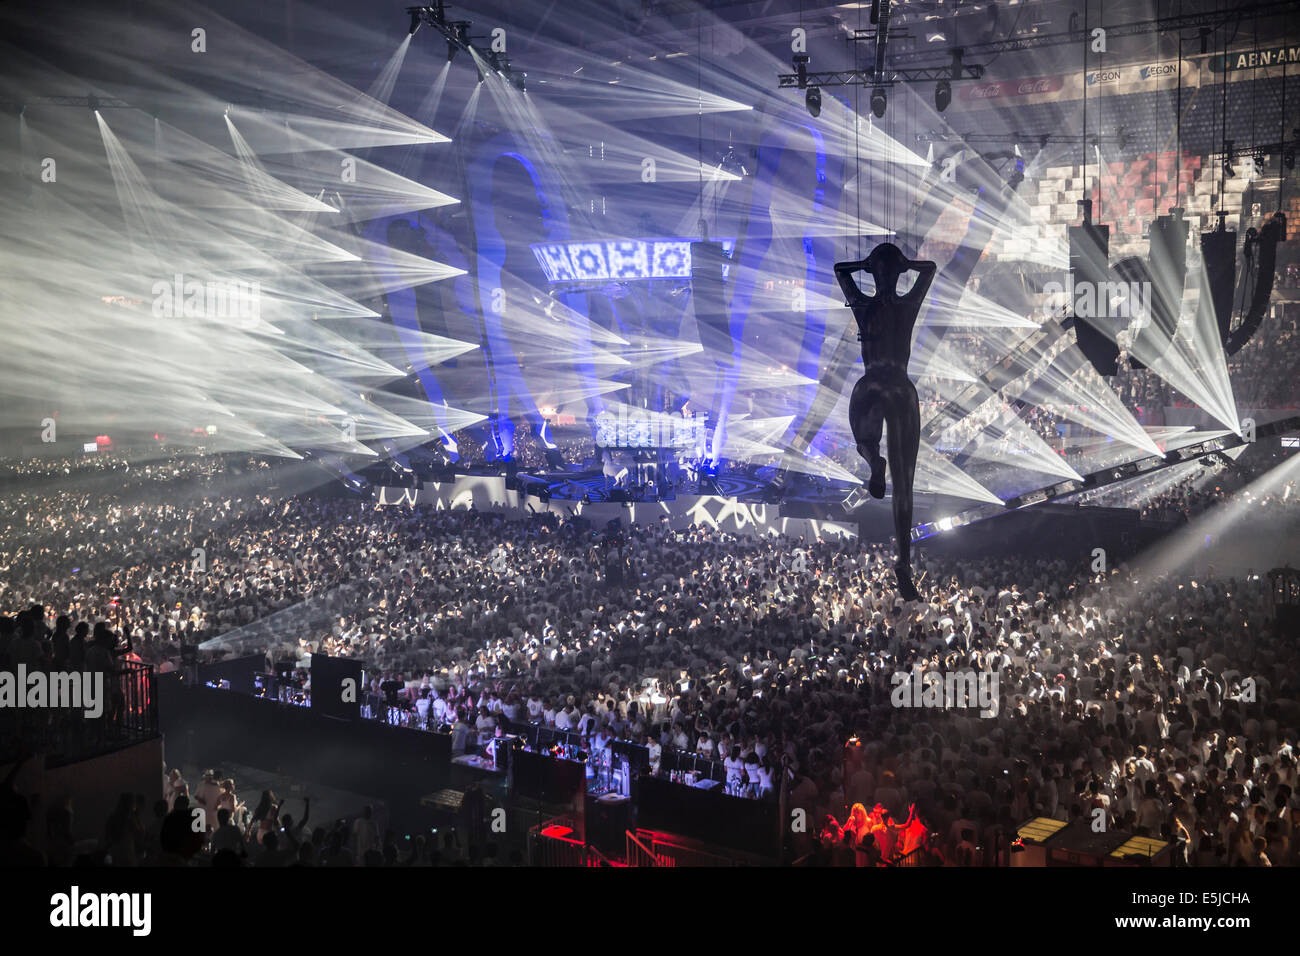 Holland, SENSATION. Premiere 'Welcome to the Pleasuredome' Amsterdam Arena. 5 July 2014. DJ Nicky Romero. Editorial use only Stock Photo